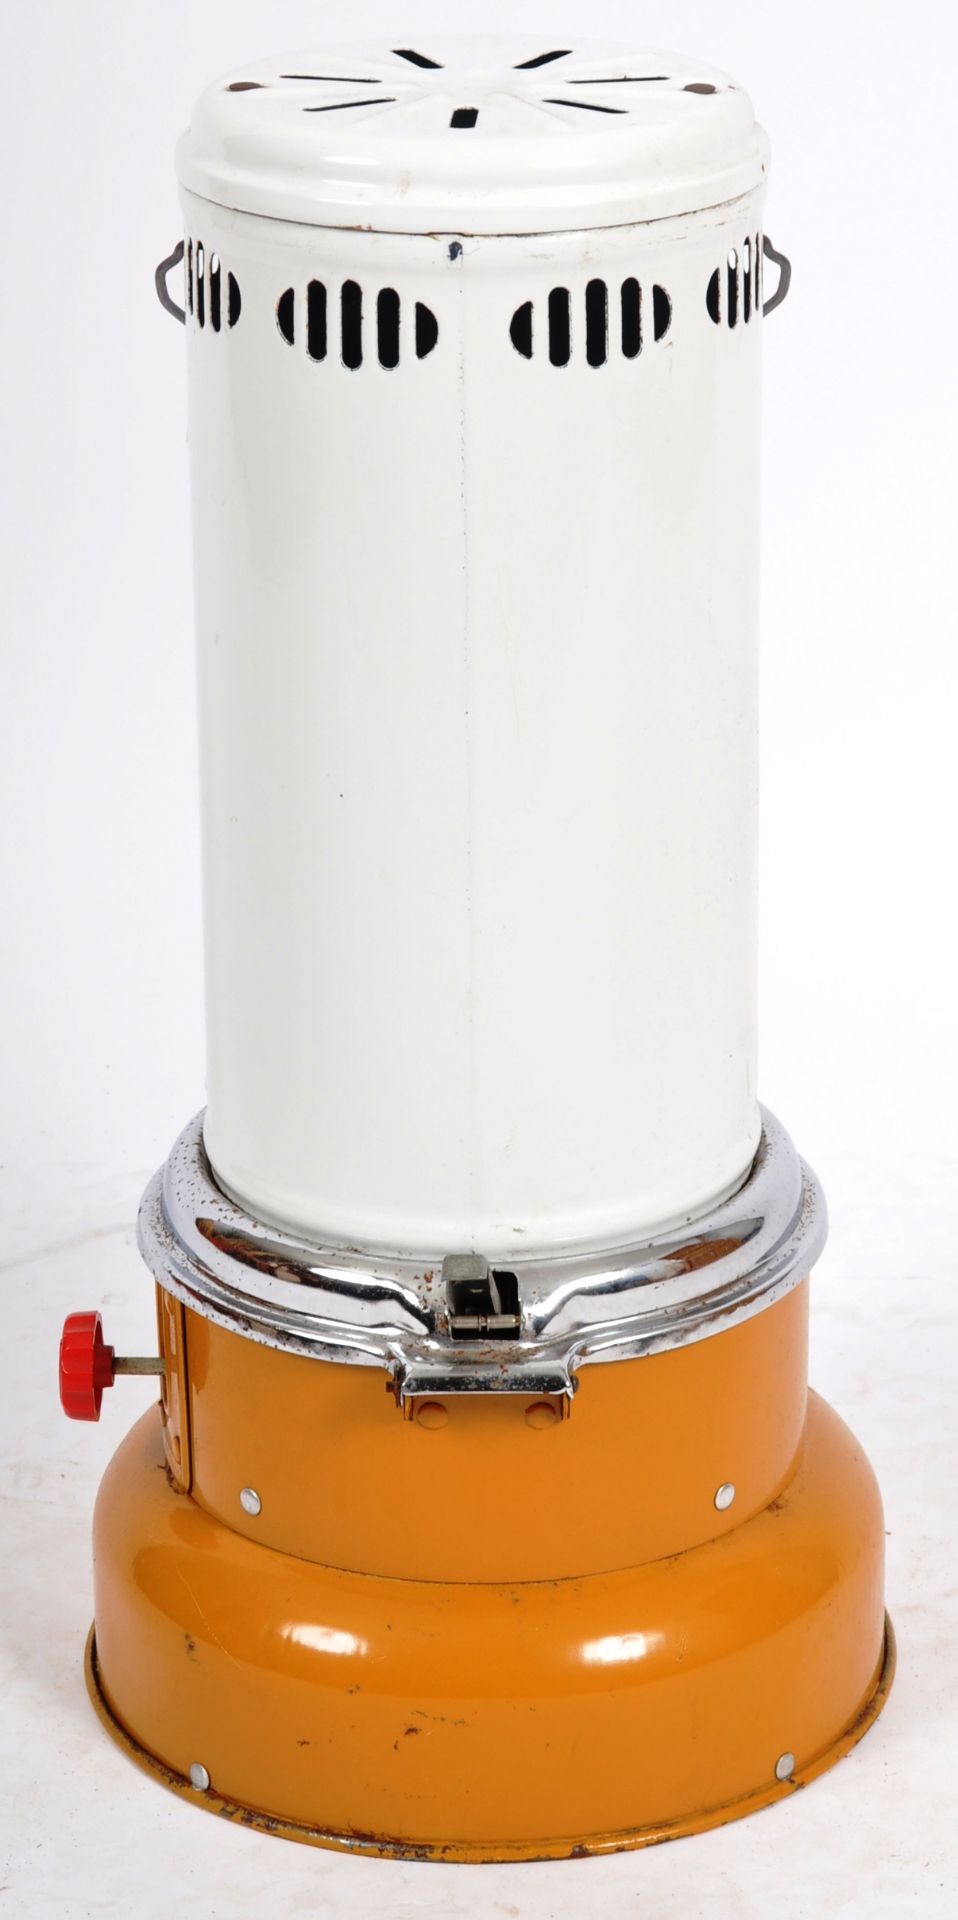 VALOR - MID CENTURY TWO TONE ENAMELED PARAFFIN HEATER - Image 3 of 7